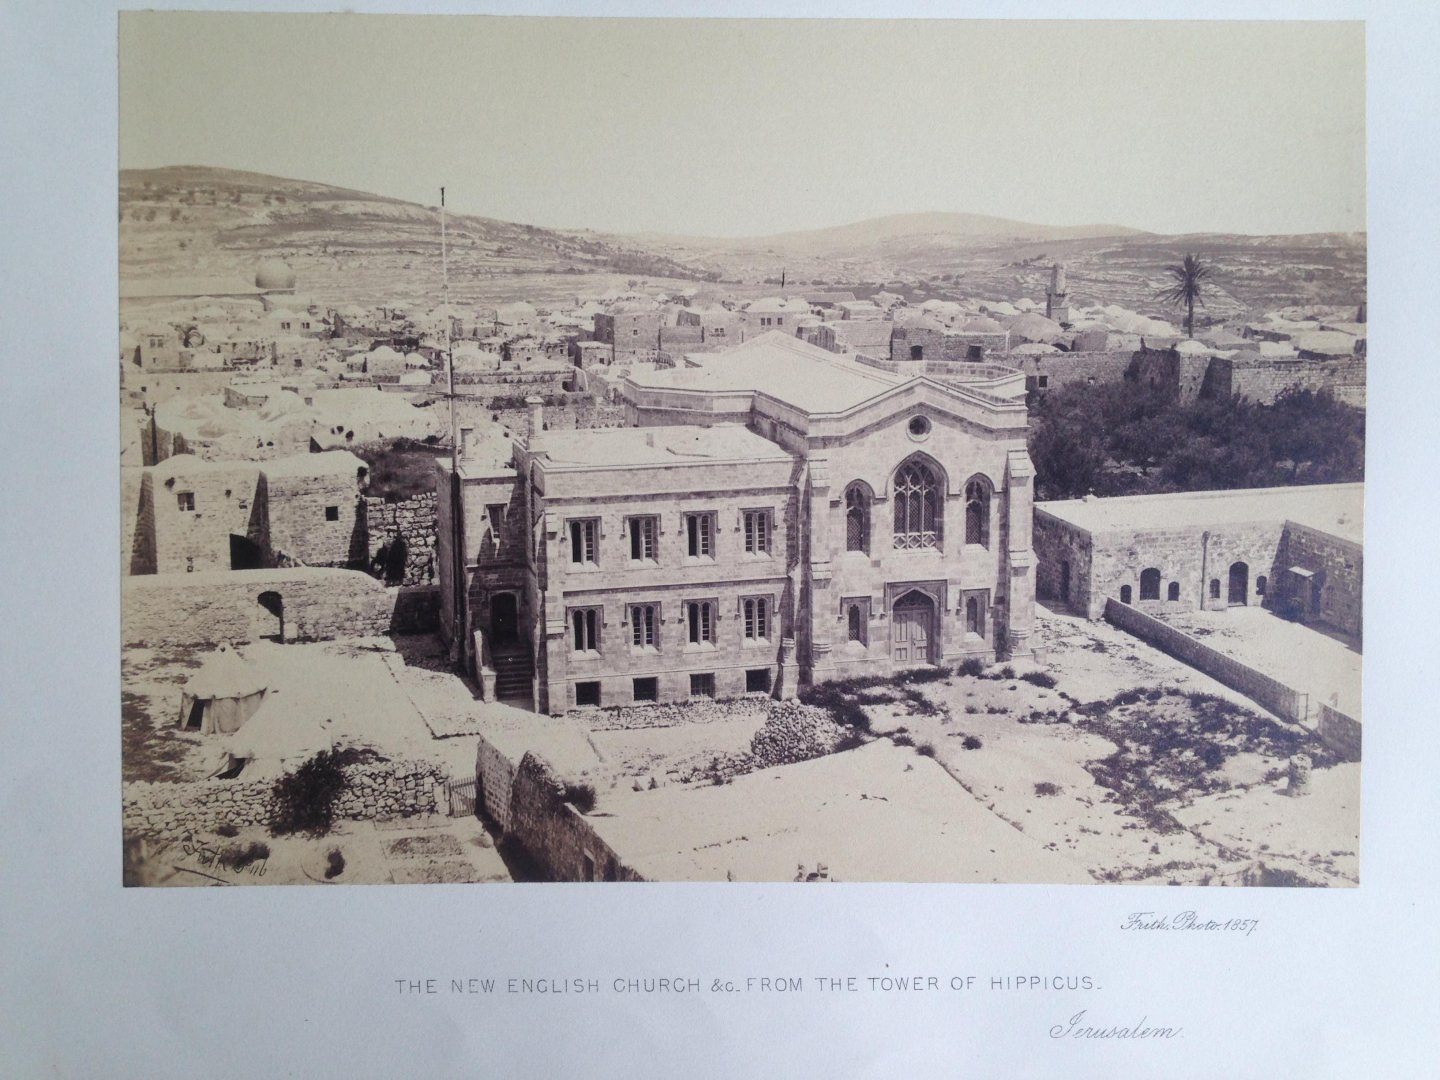 Frith, Francis - The New English Church & c from the Tower of Hippicus, Jerusalem, Series Egypt and Palestine